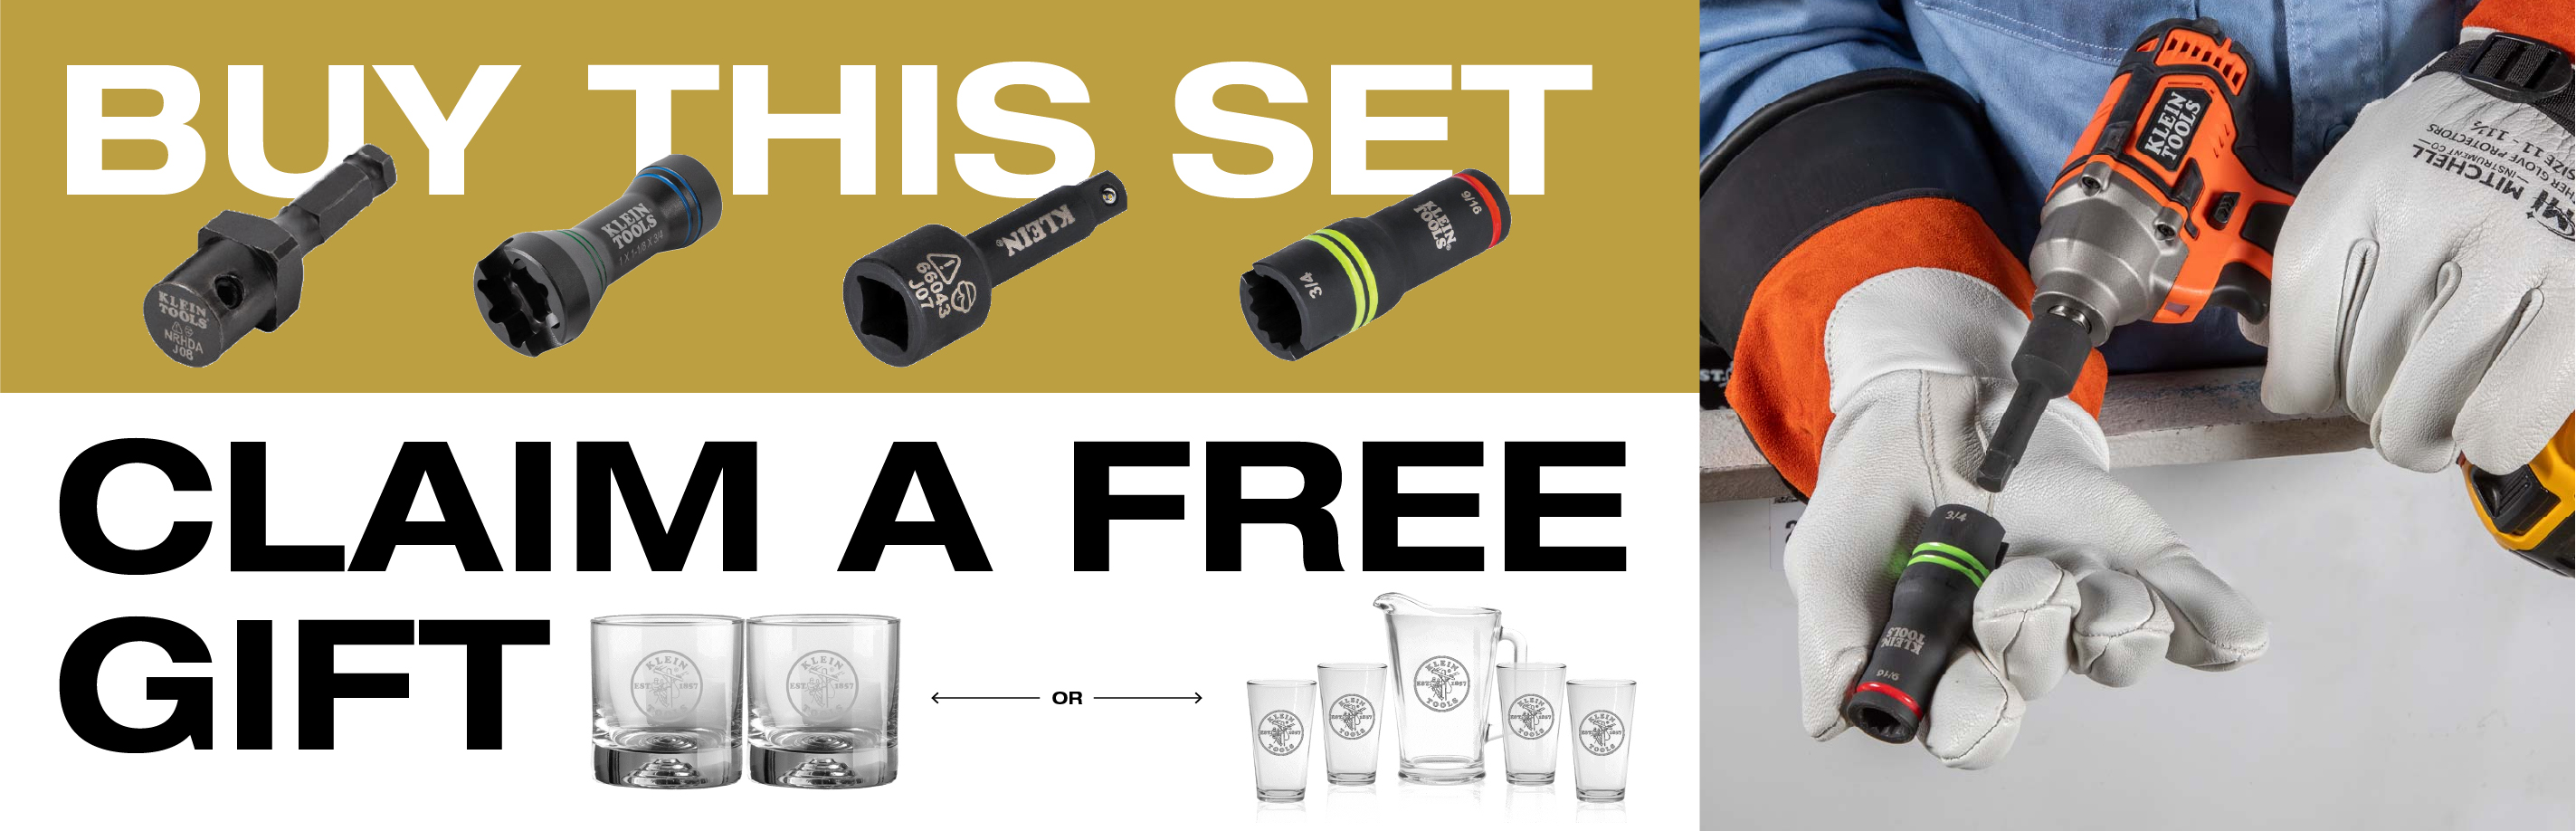  While supplies last - get a free limited-edition drinkware set with your purchase of a Klein Socket Set.